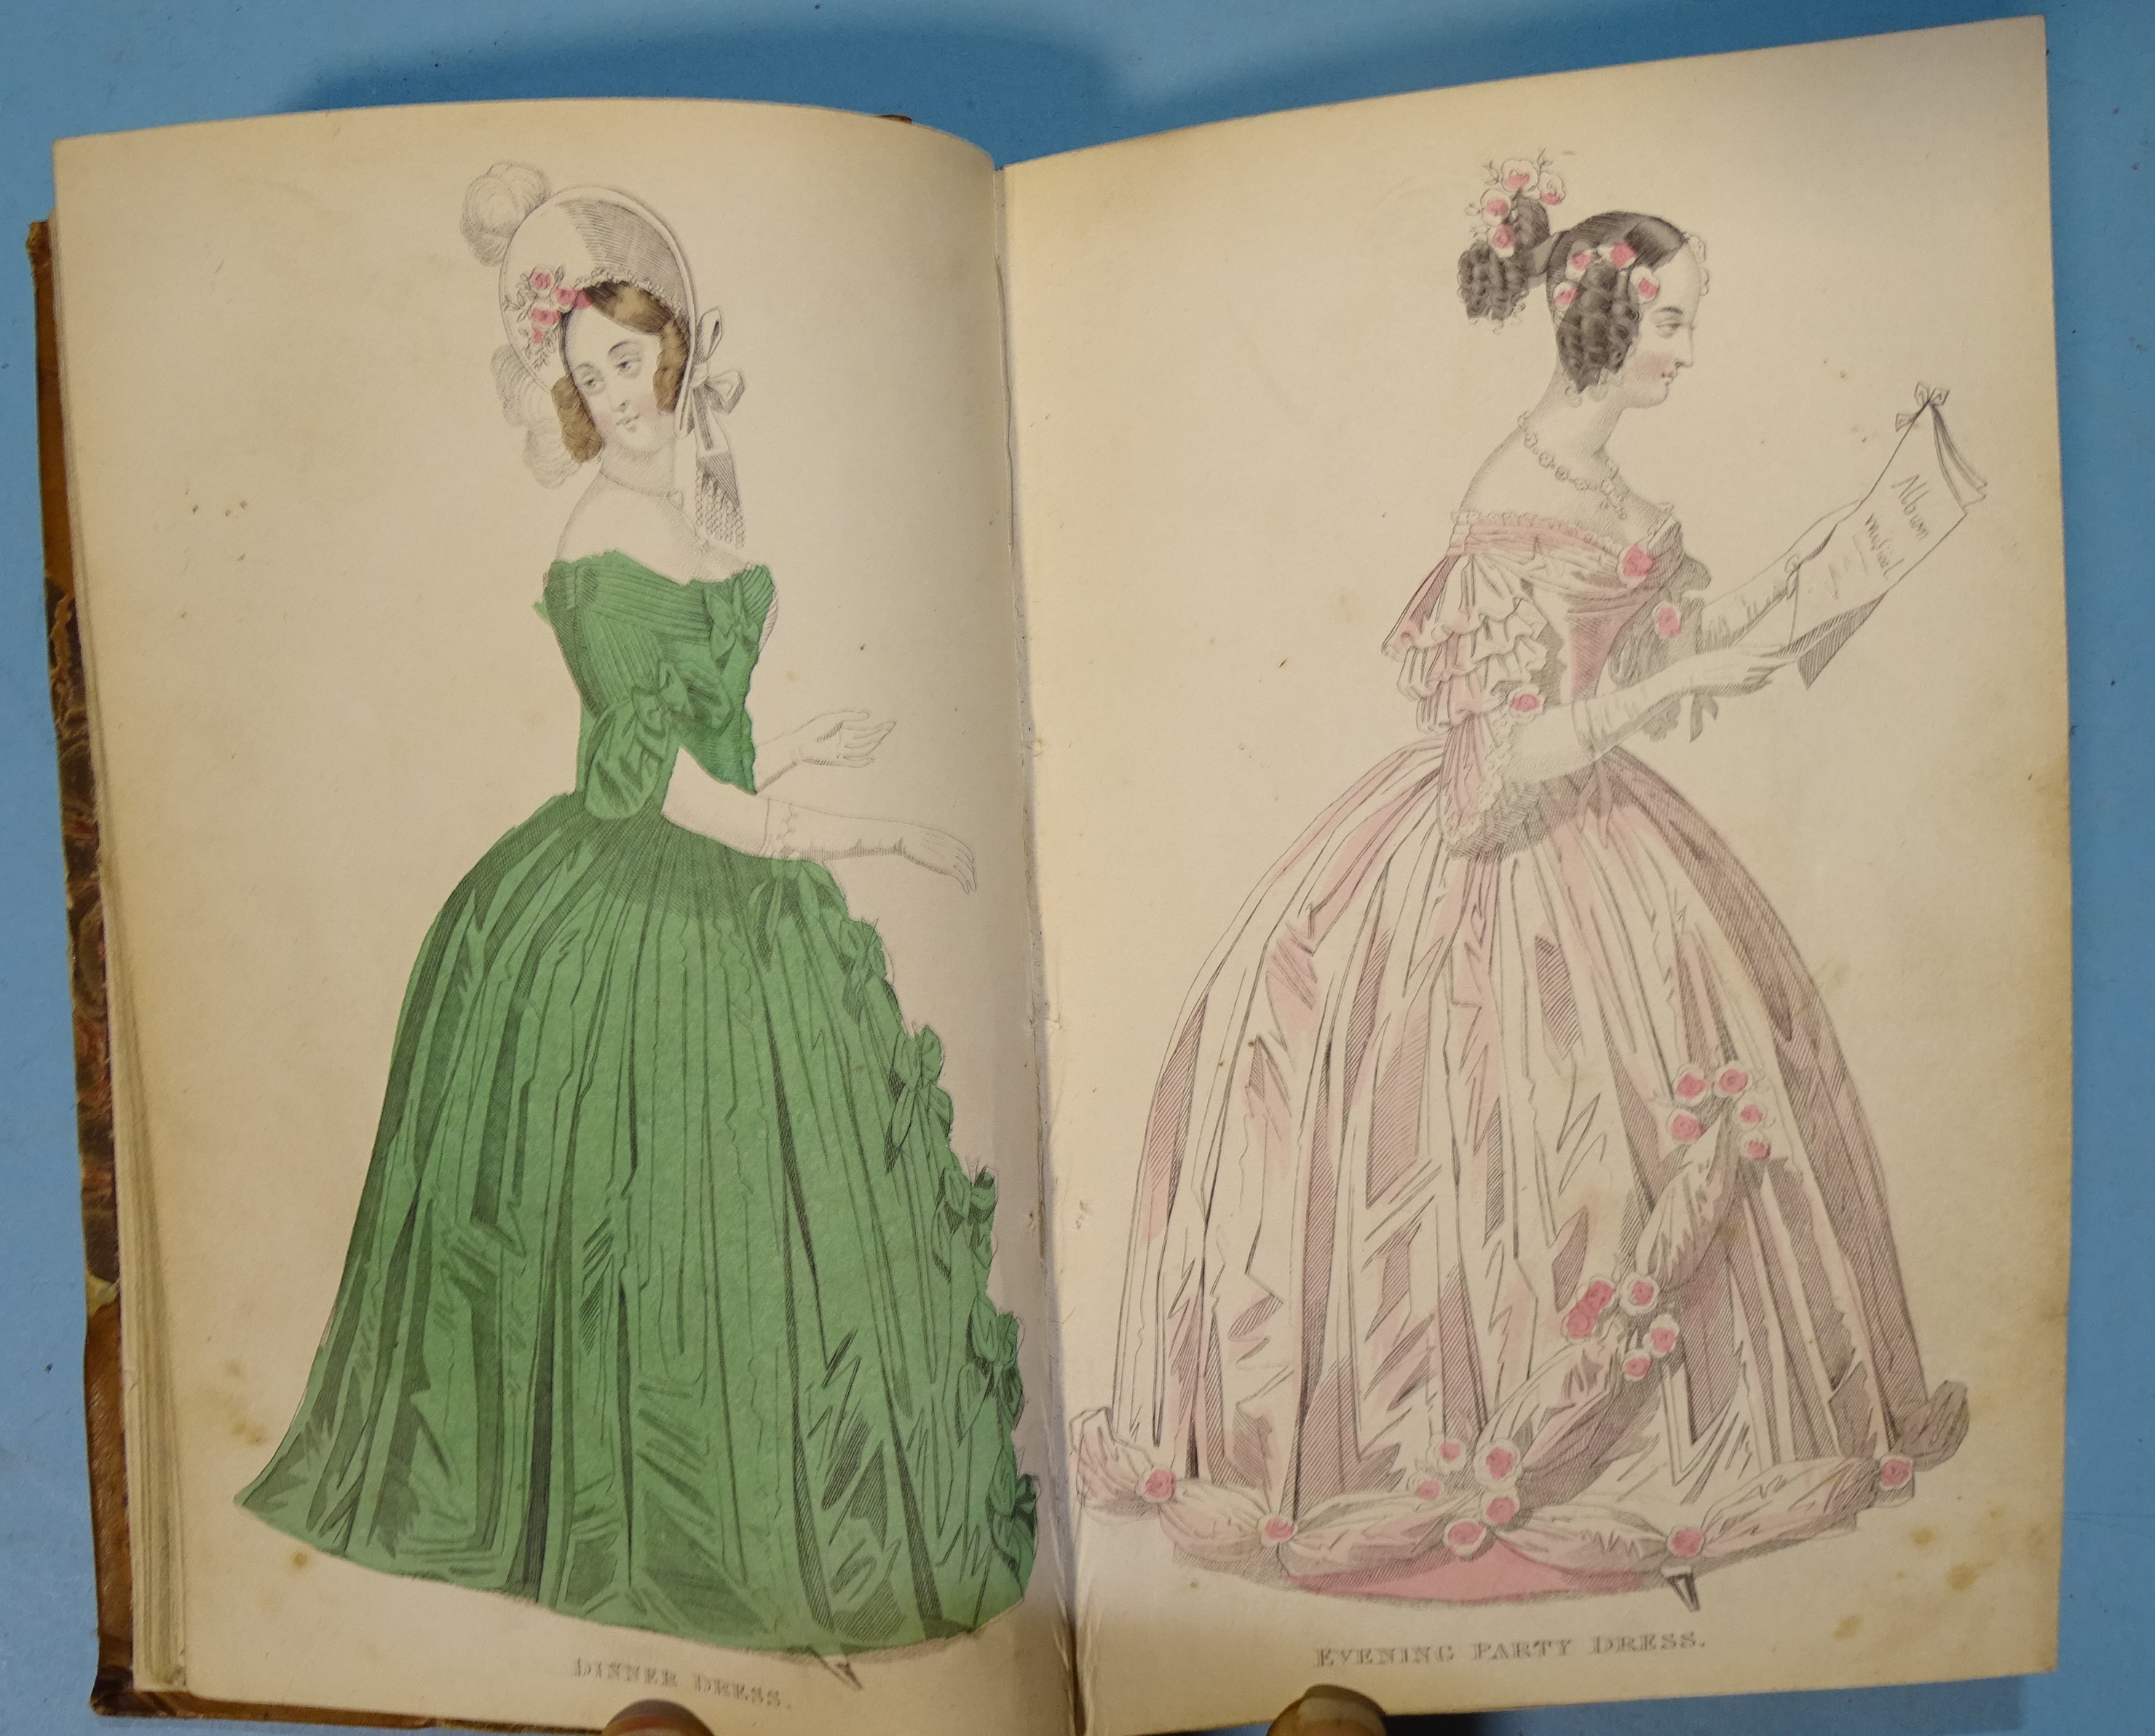 The Ladies' Cabinet of Fashion, Music and Romance, Vol XI only, 26 hand-coloured fashion plates, me, - Image 2 of 4